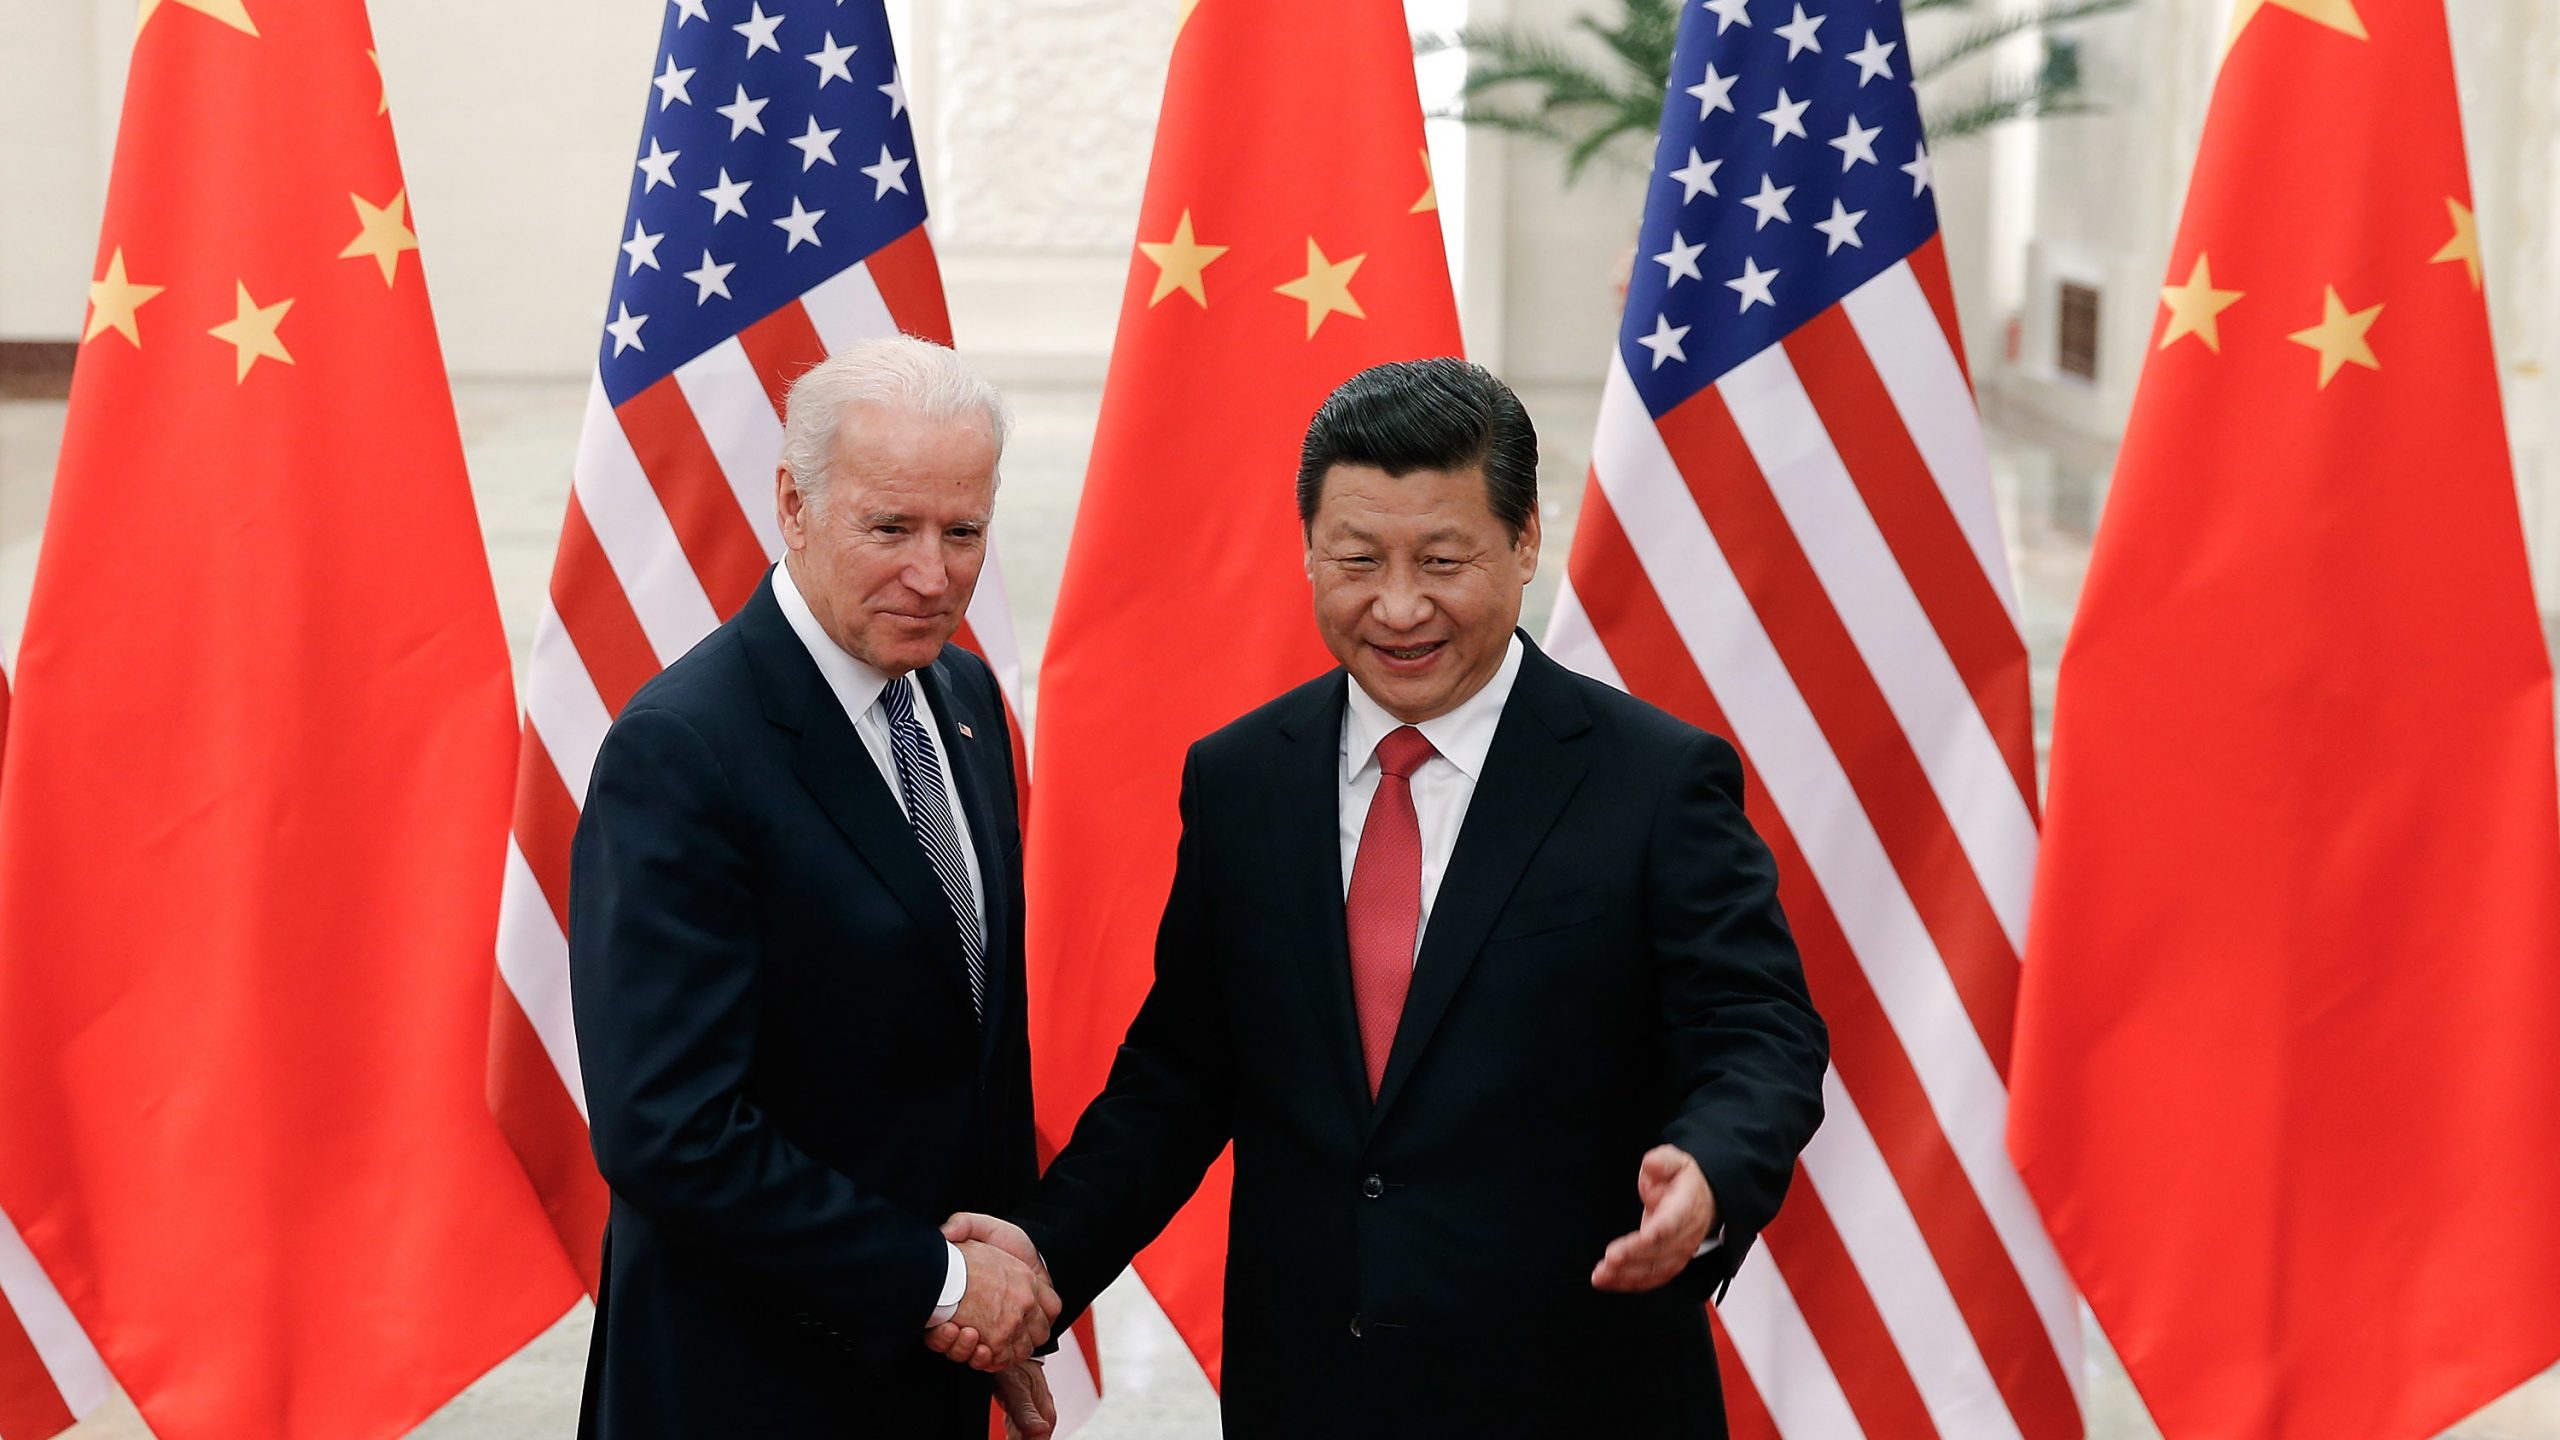 Can Joe Biden deal with Xi Jinping?, and US will Start new relation with CHINA?